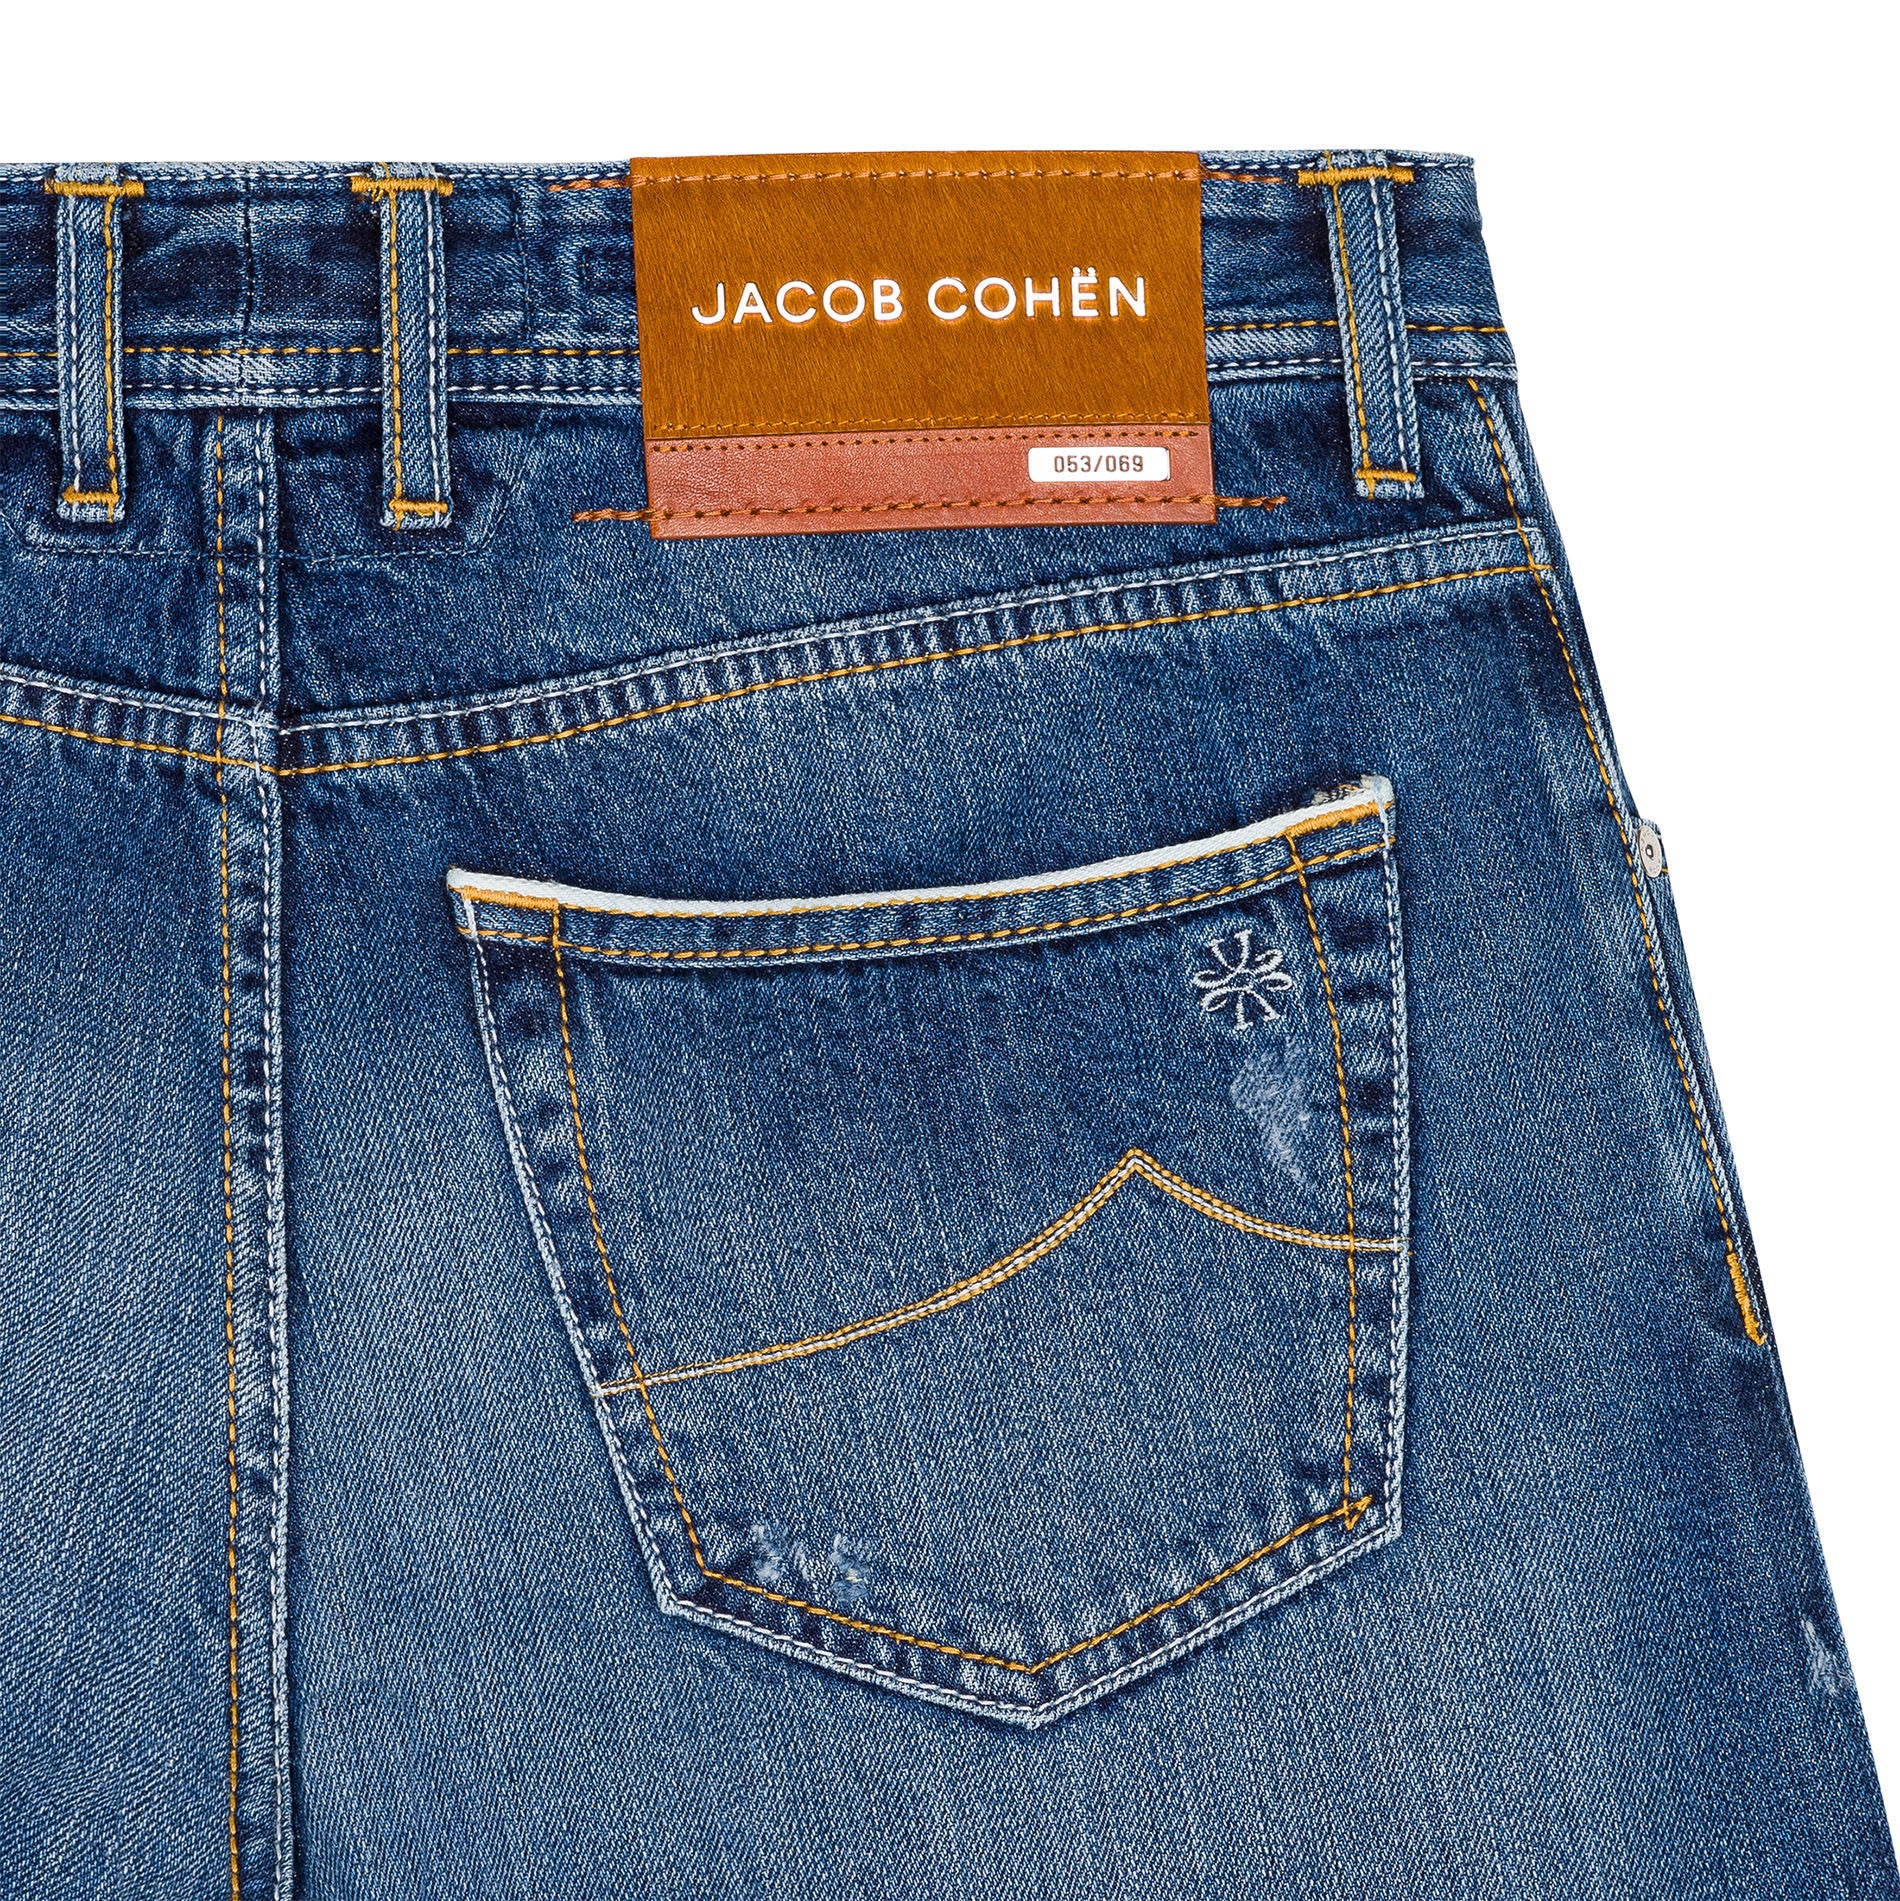 Jacob Cohen Limited Edition Nick